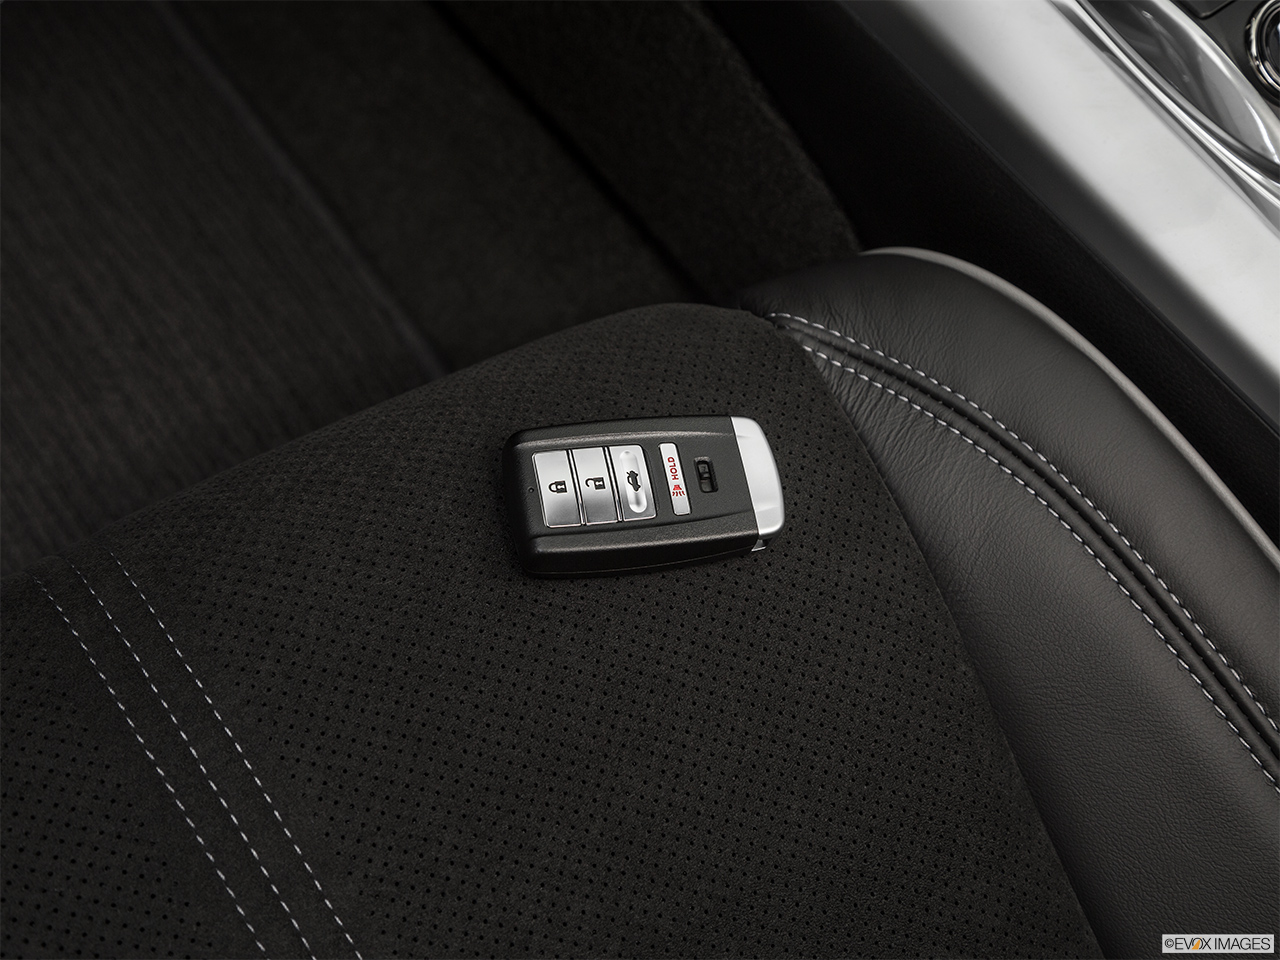 2020 Acura TLX 3.5L Key fob on driver's seat. 